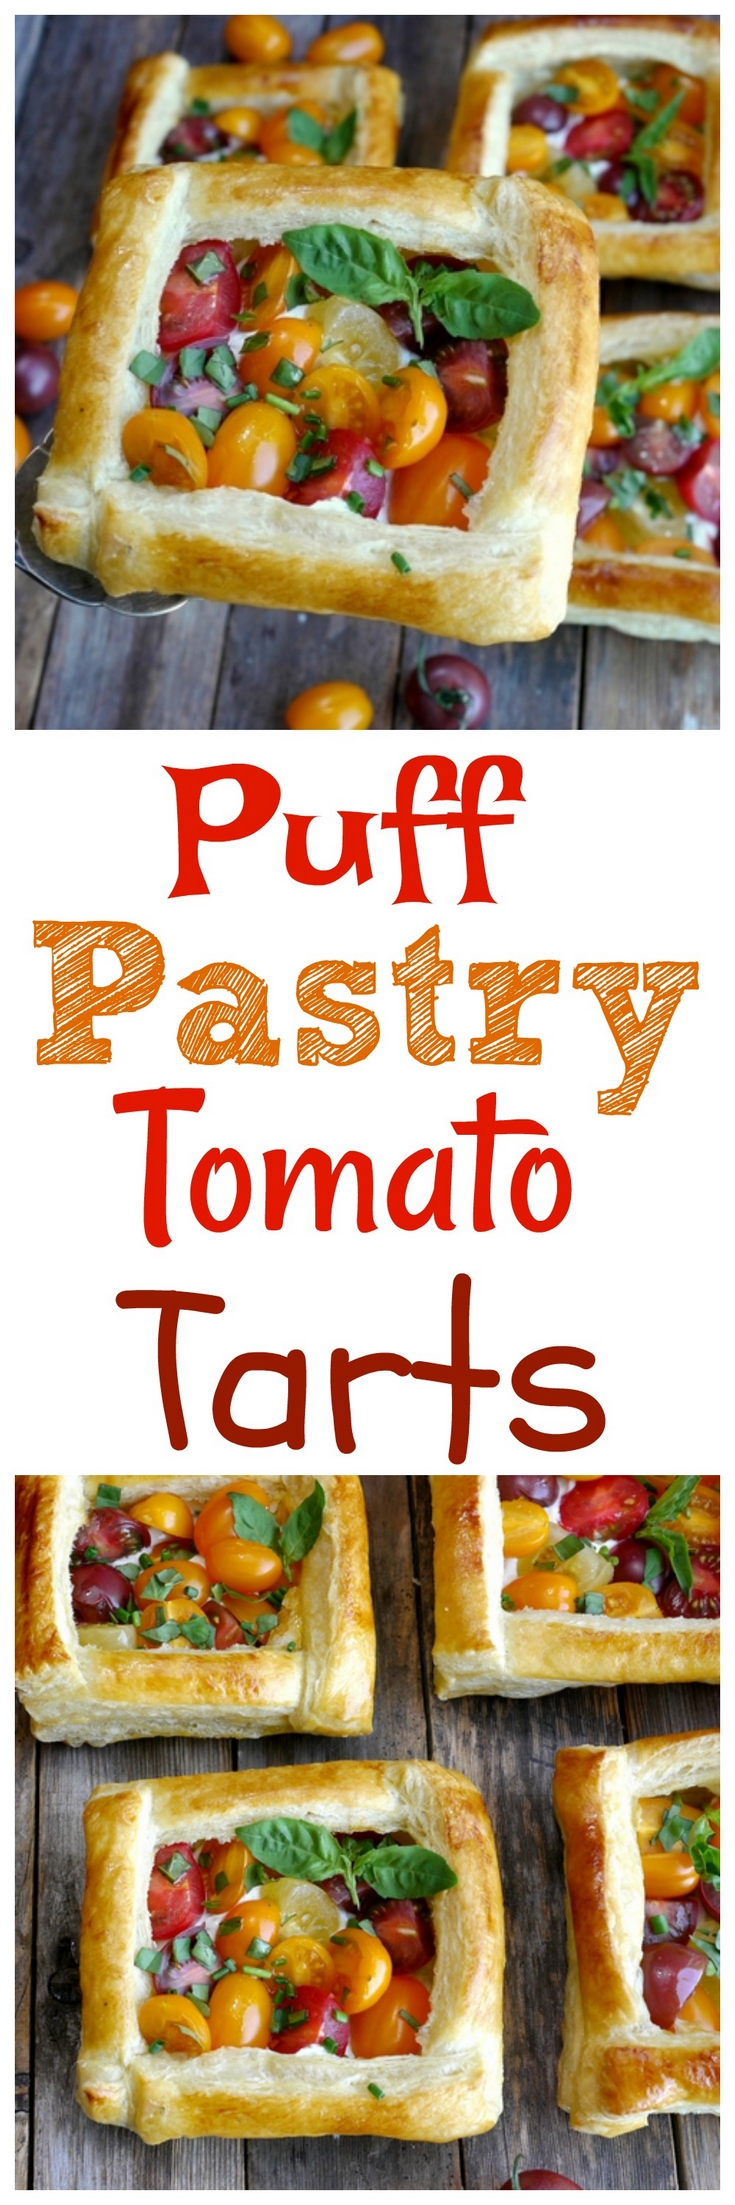 VIDEO + RECIPE: The perfect starter to any meal, these Puff Pastry Tomato Tarts are so delicious and couldn't be easier to make. Use up that basket of tomatoes today from NoblePig.com. via @cmpollak1